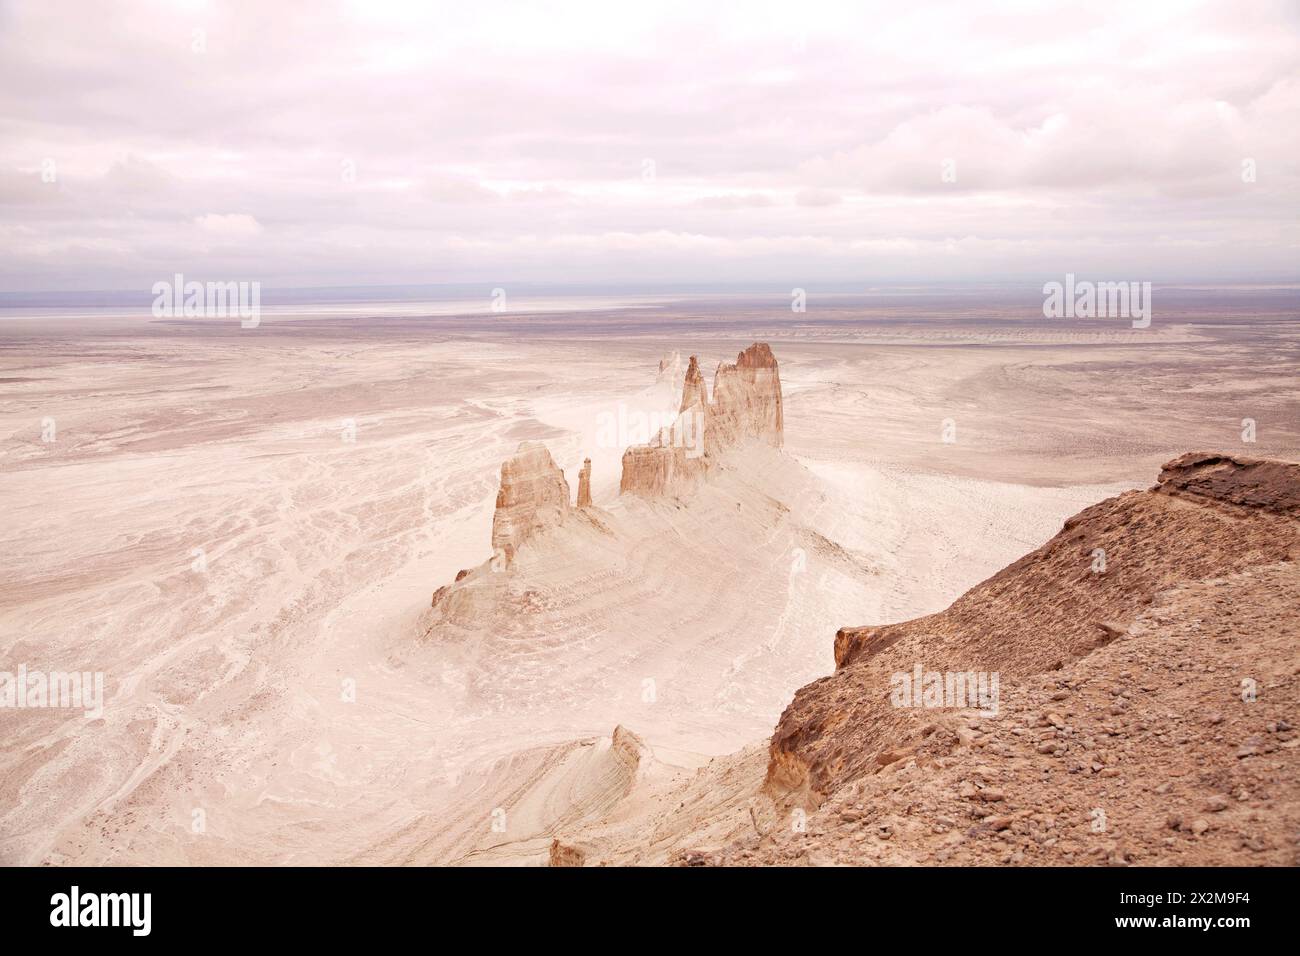 Bozzhyra tract in Kazakhstan, a scenic and arid desert landscape featuring dramatic rock formations and sediment layers. Stock Photo